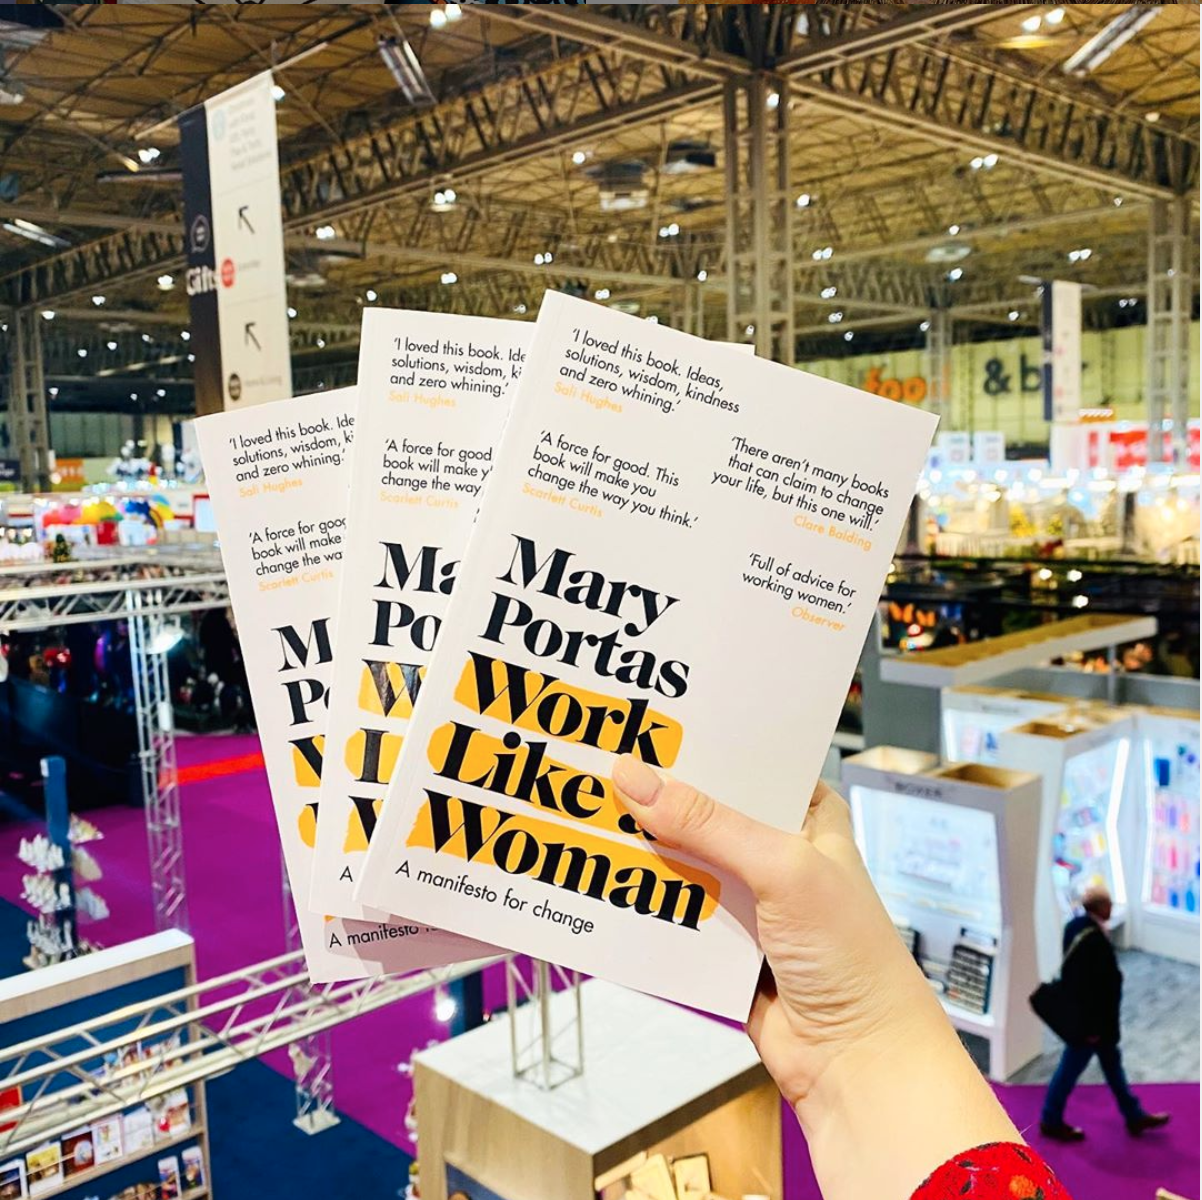 Above: Spring Fair gave away 20 signed copies of Mary Portas’ latest book Work Like A Woman: a manifesto for change, which draws on her business experience and outlines how we must all play a role in making the world of work a better place, for everyone. 